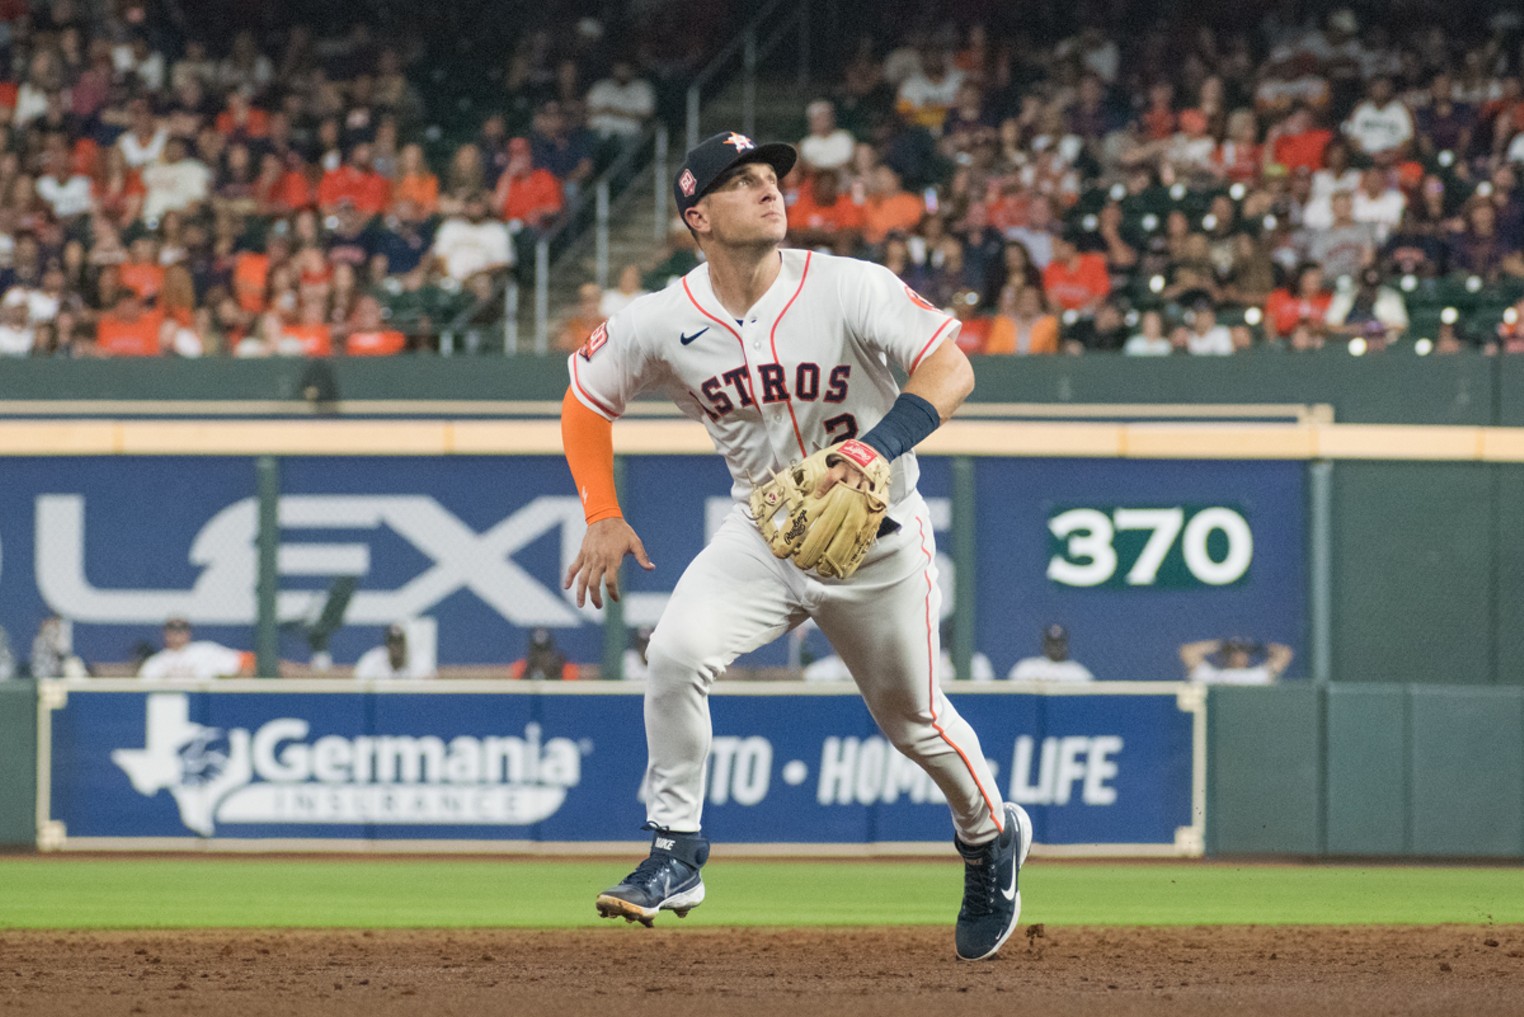 Sean's Wishlist: Alex Bregman Named AL Player of the Month for August